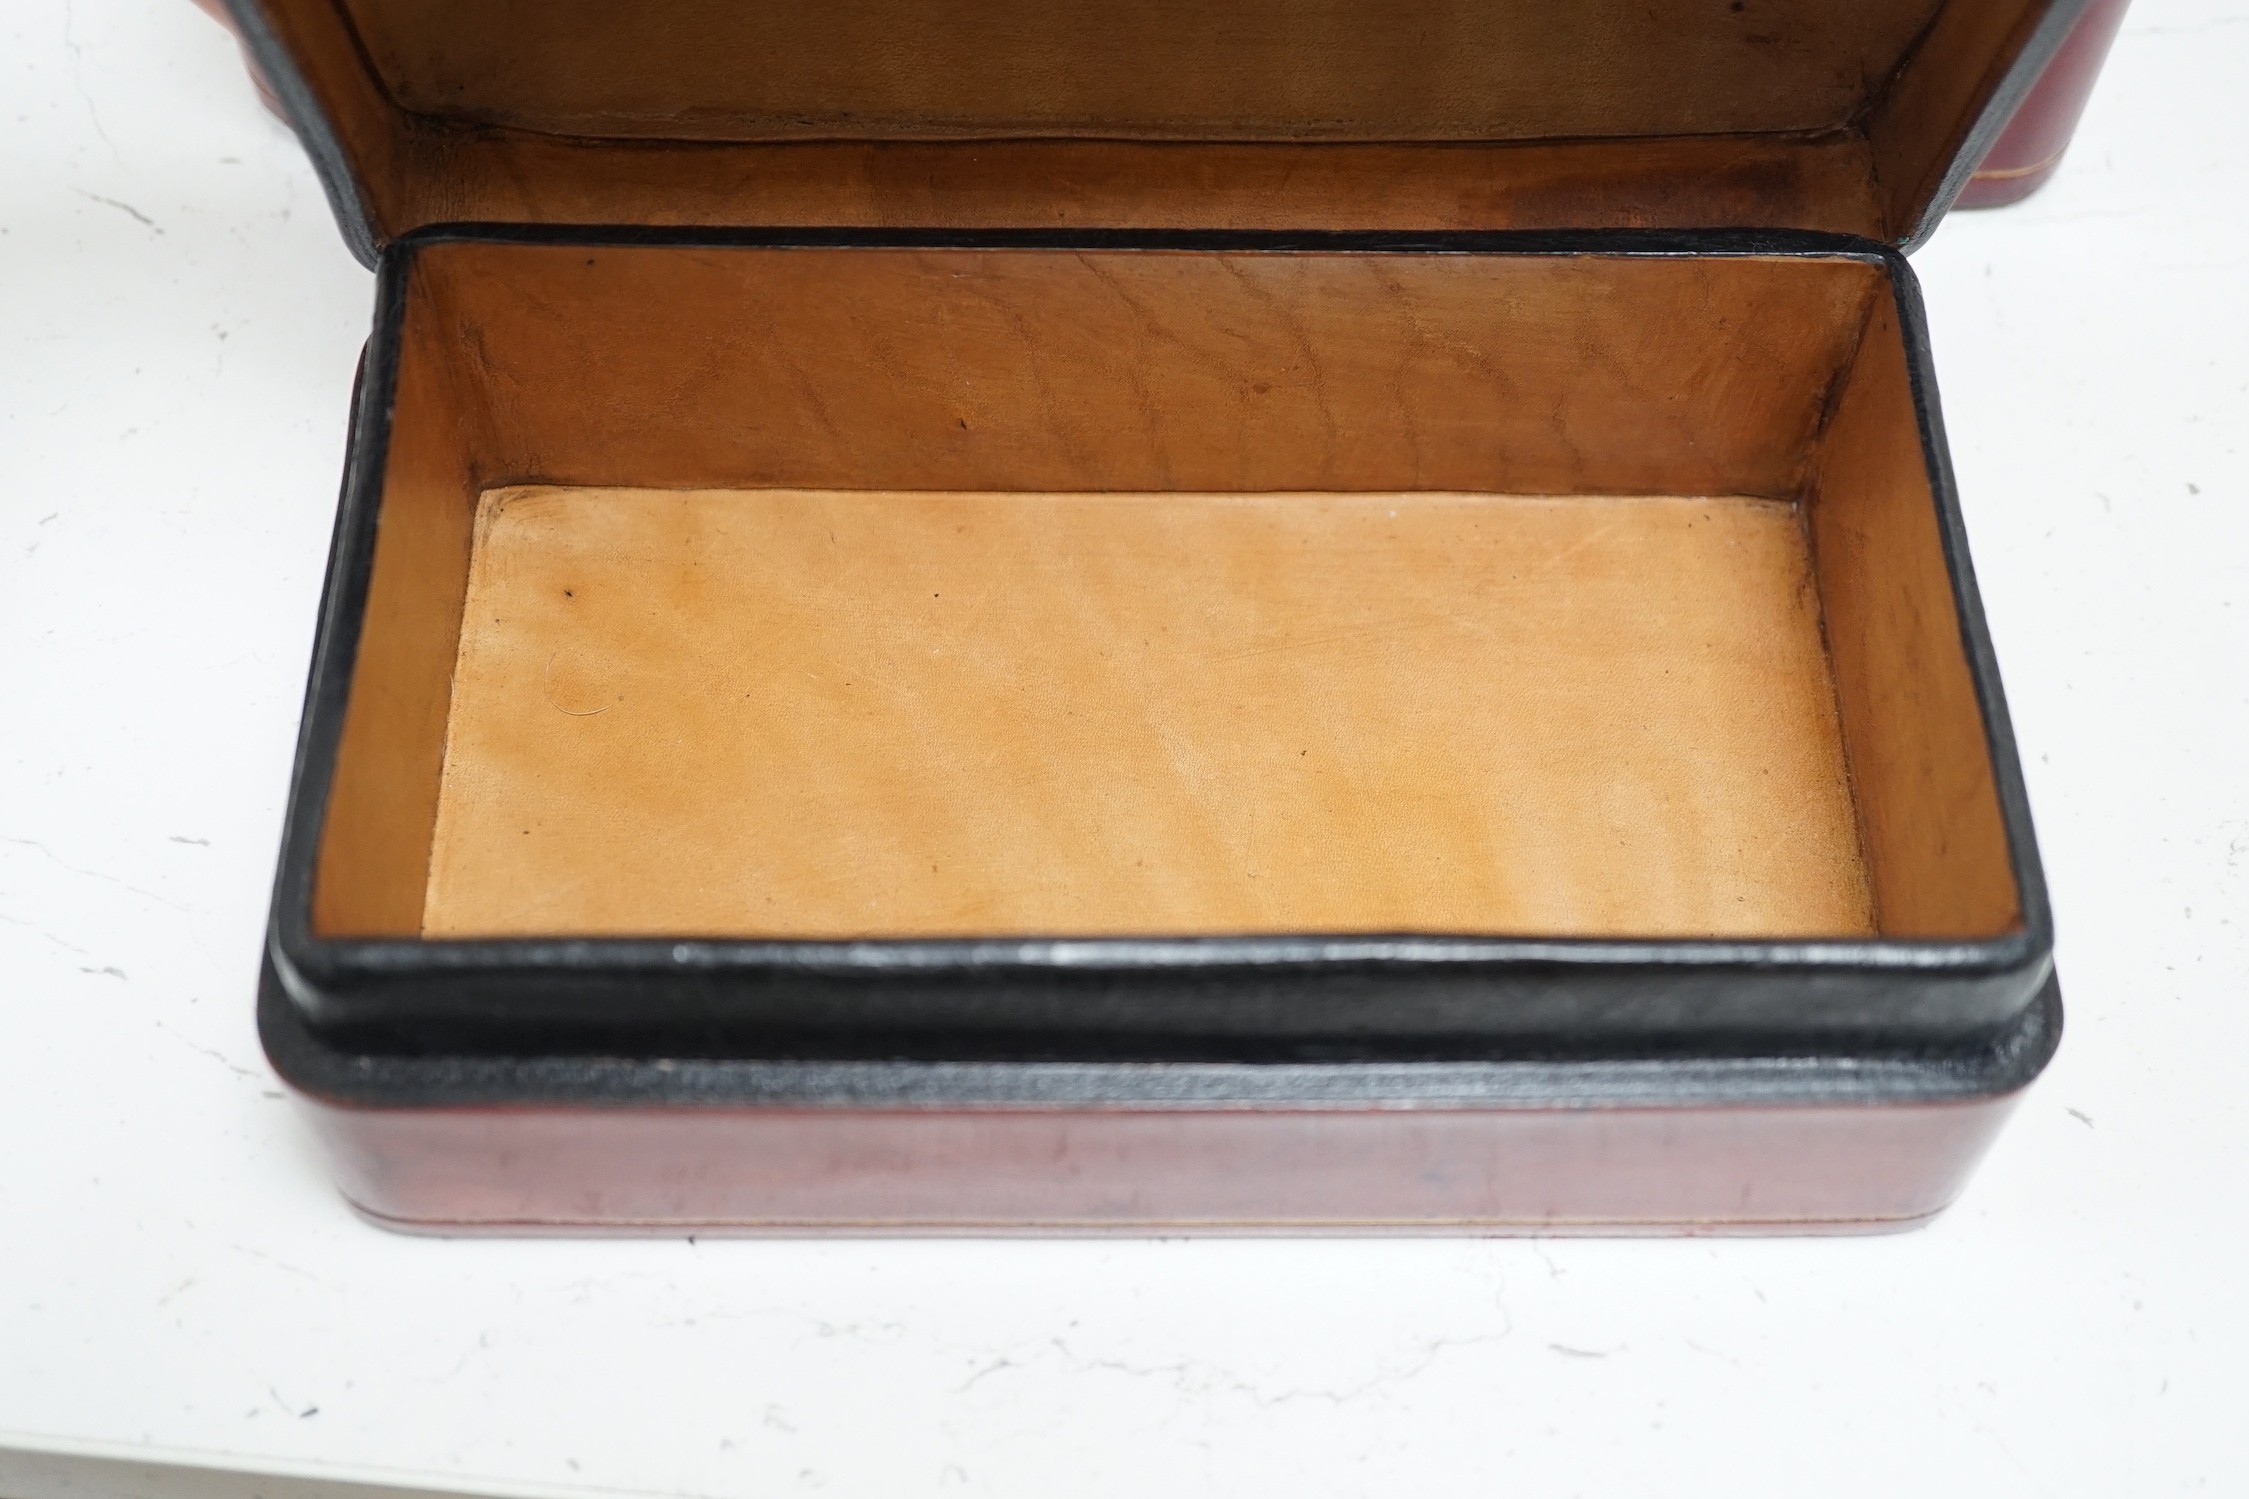 Two red leather boxes, Largest 26.5 cm wide